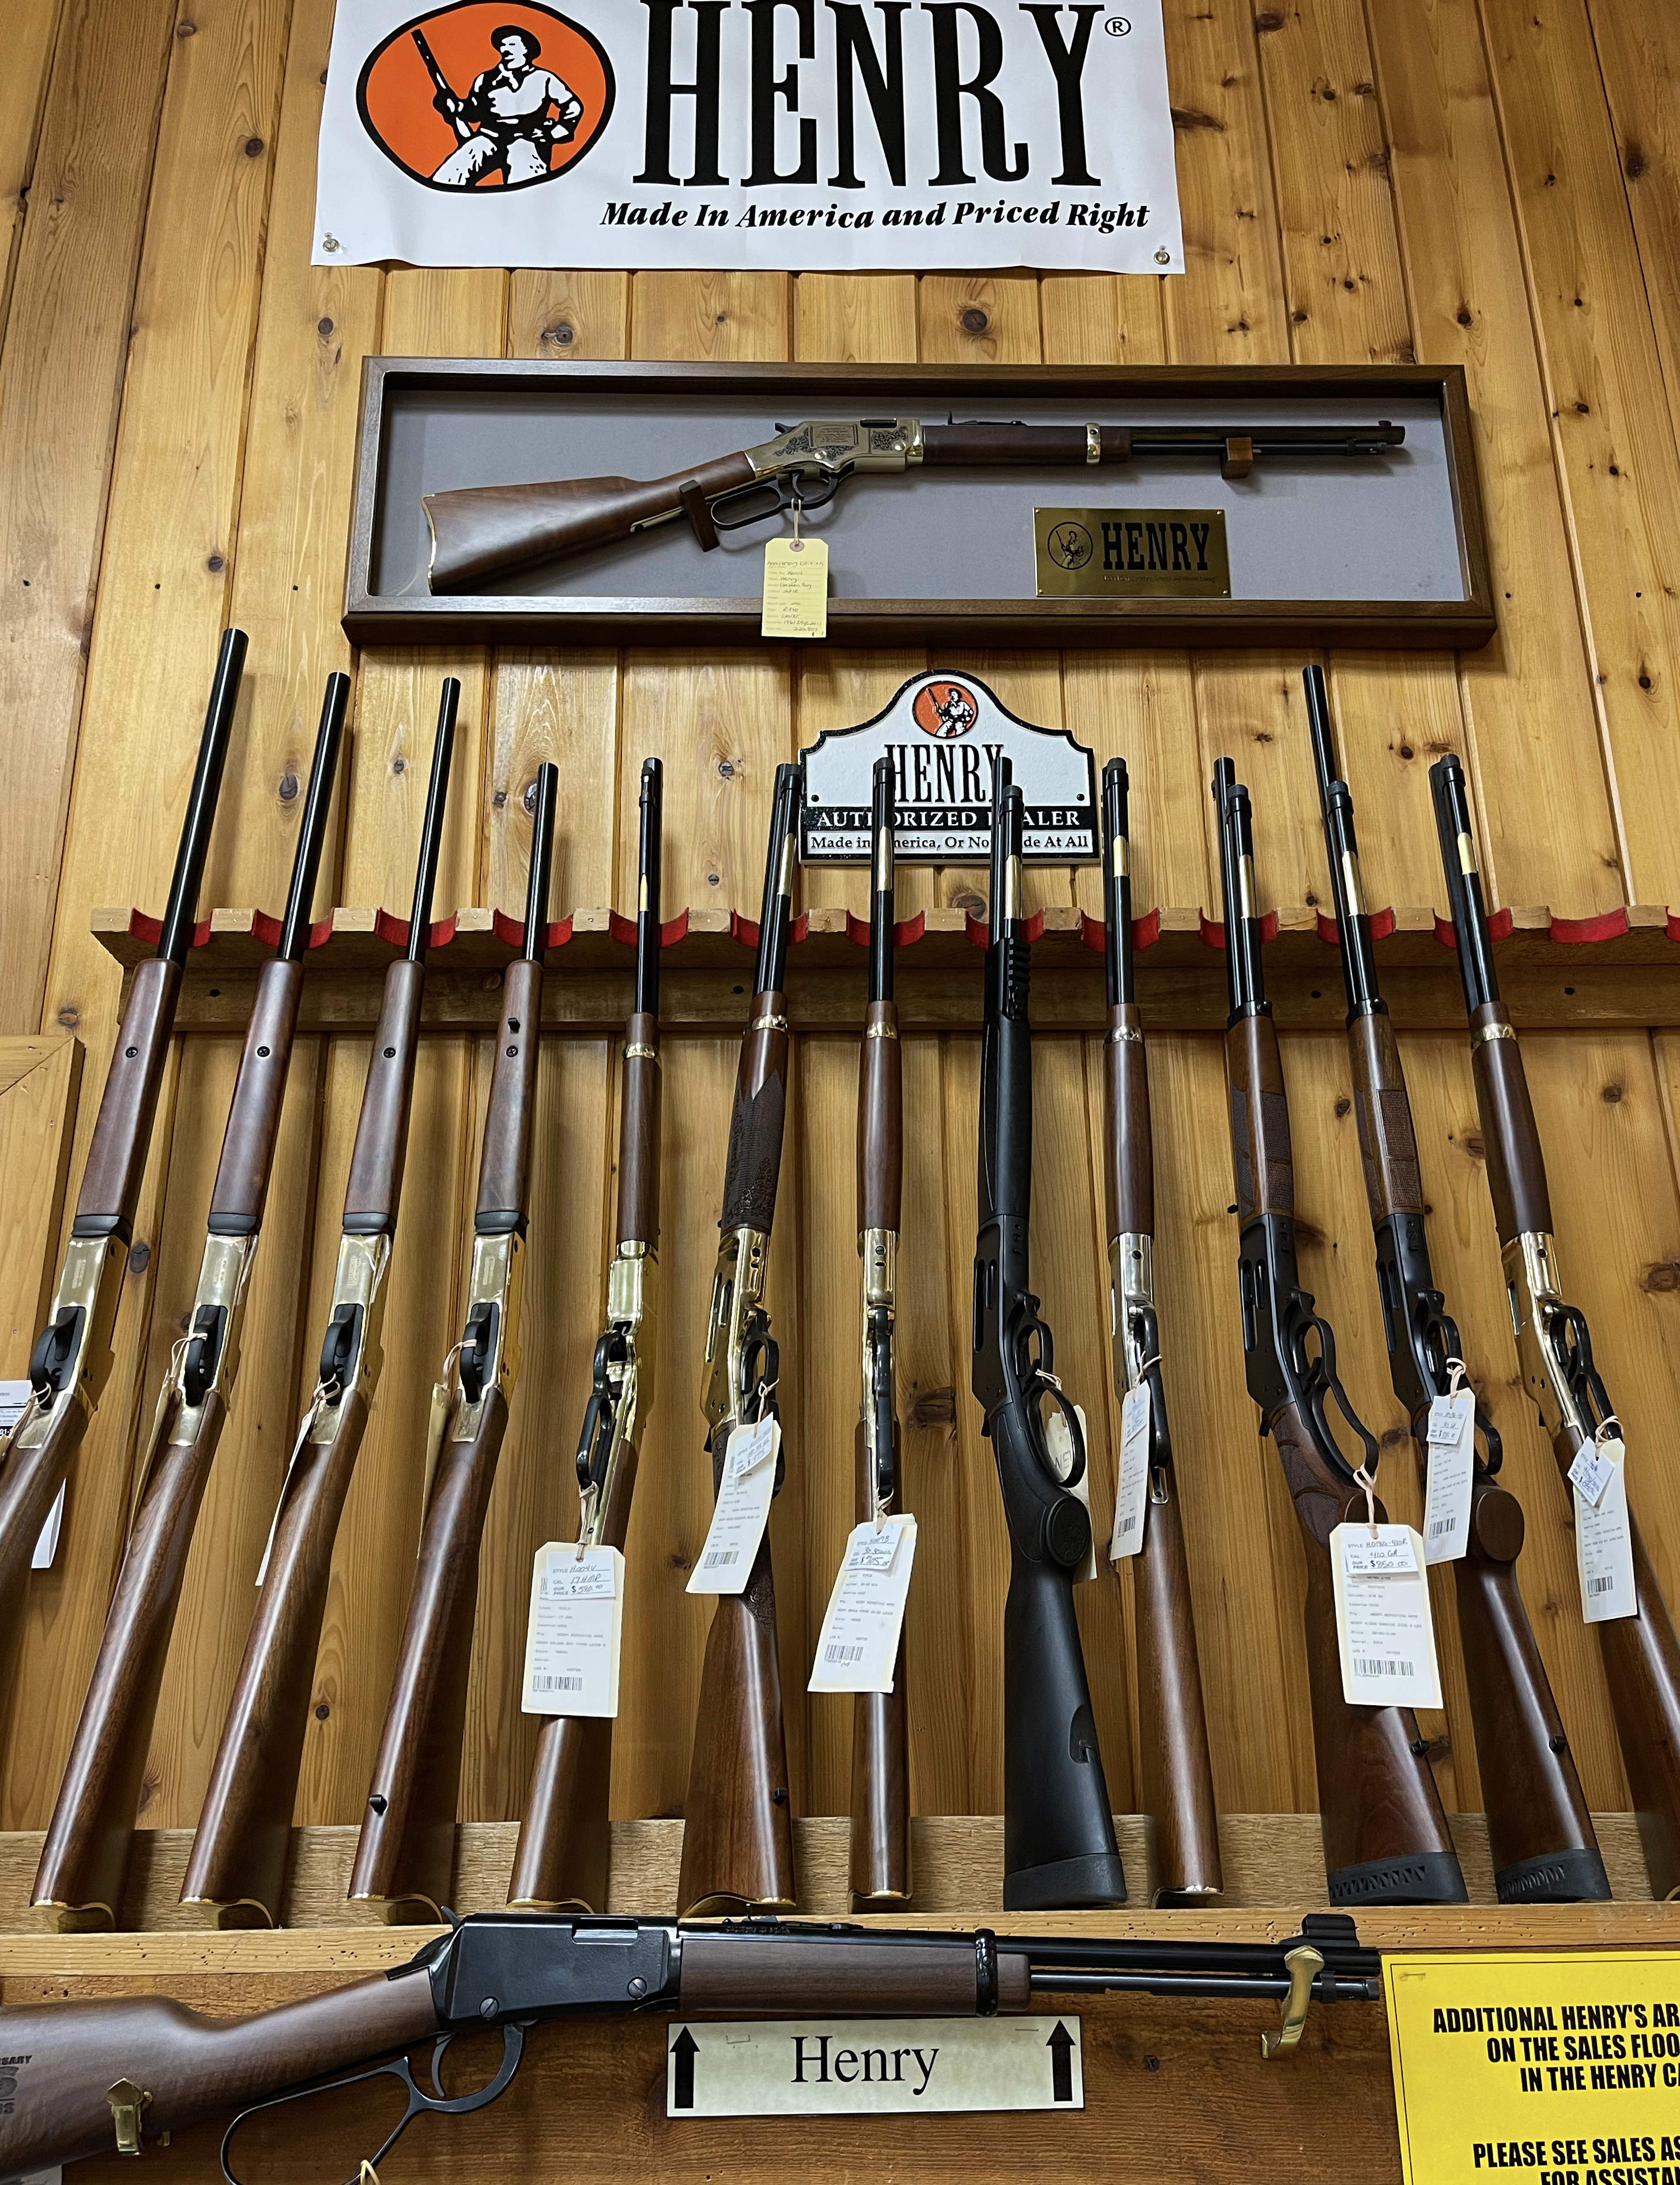 Retail display of many Henry rifles